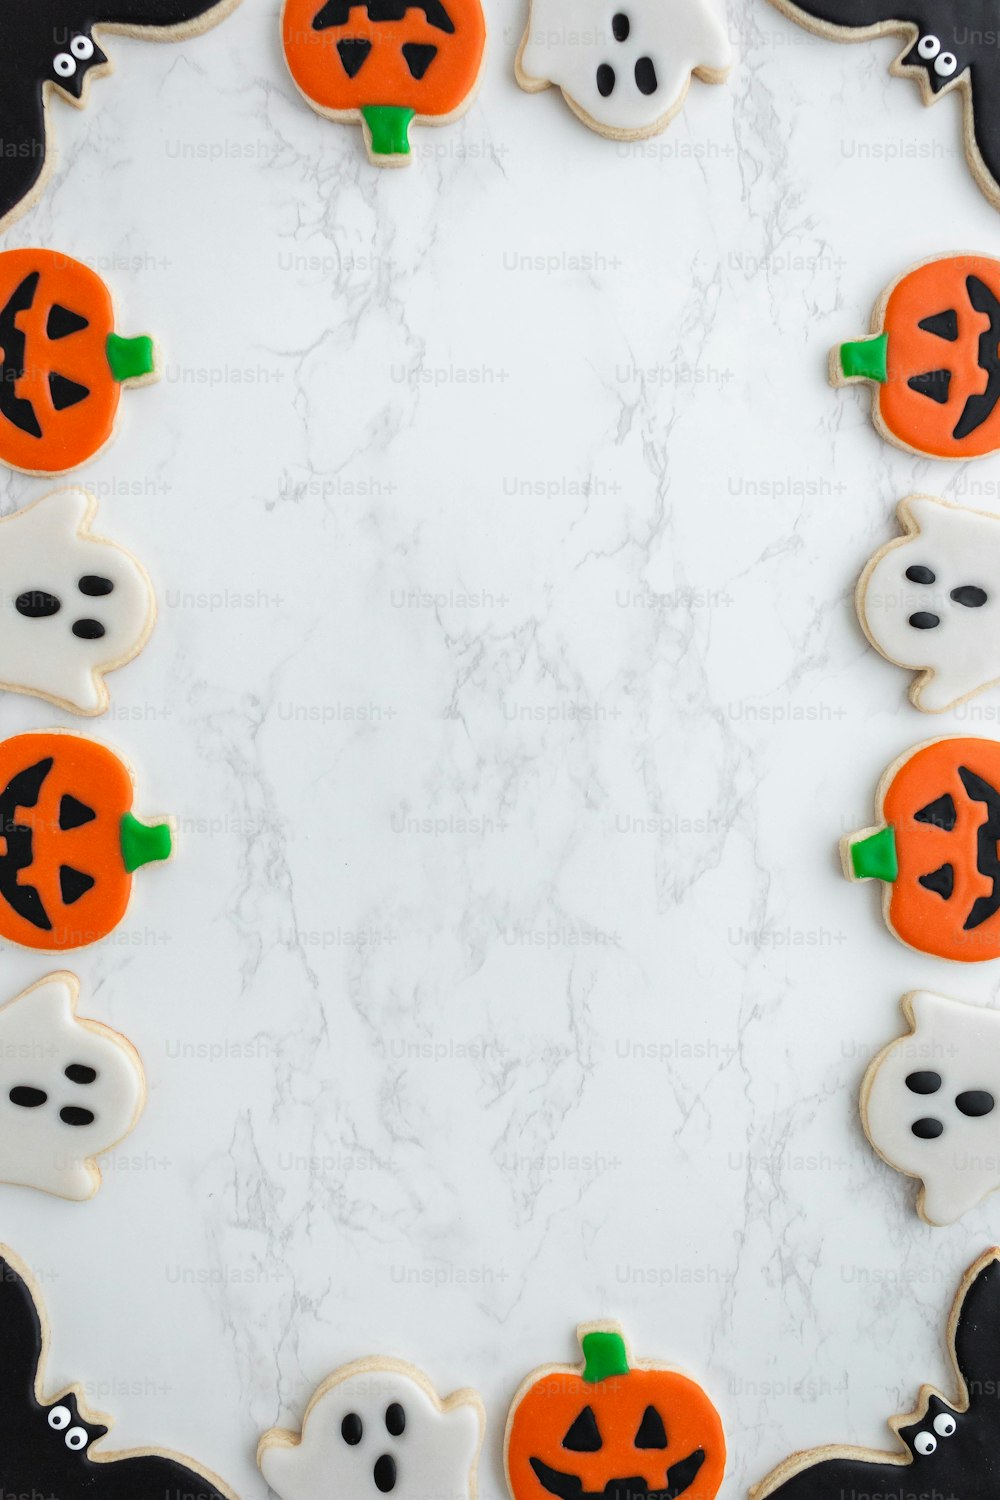 decorated cookies arranged in the shape of ghost and pumpkins